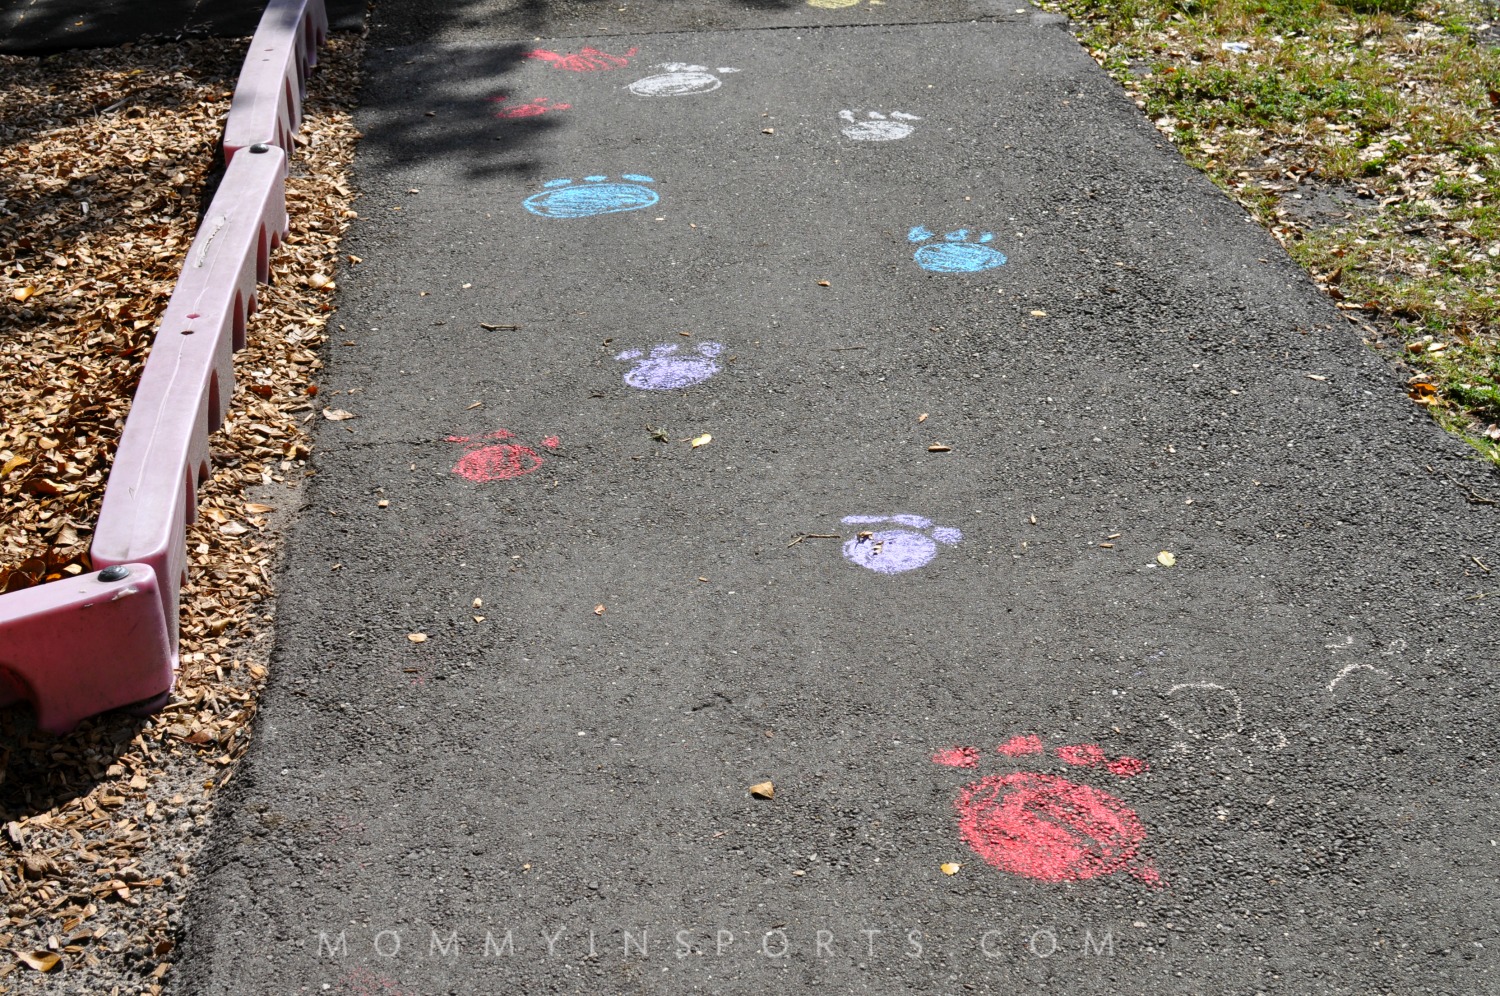 Is your little one obsessed with cats? Here are some adorable ideas to help you throw a killer kitty cat party that won't break the bank!